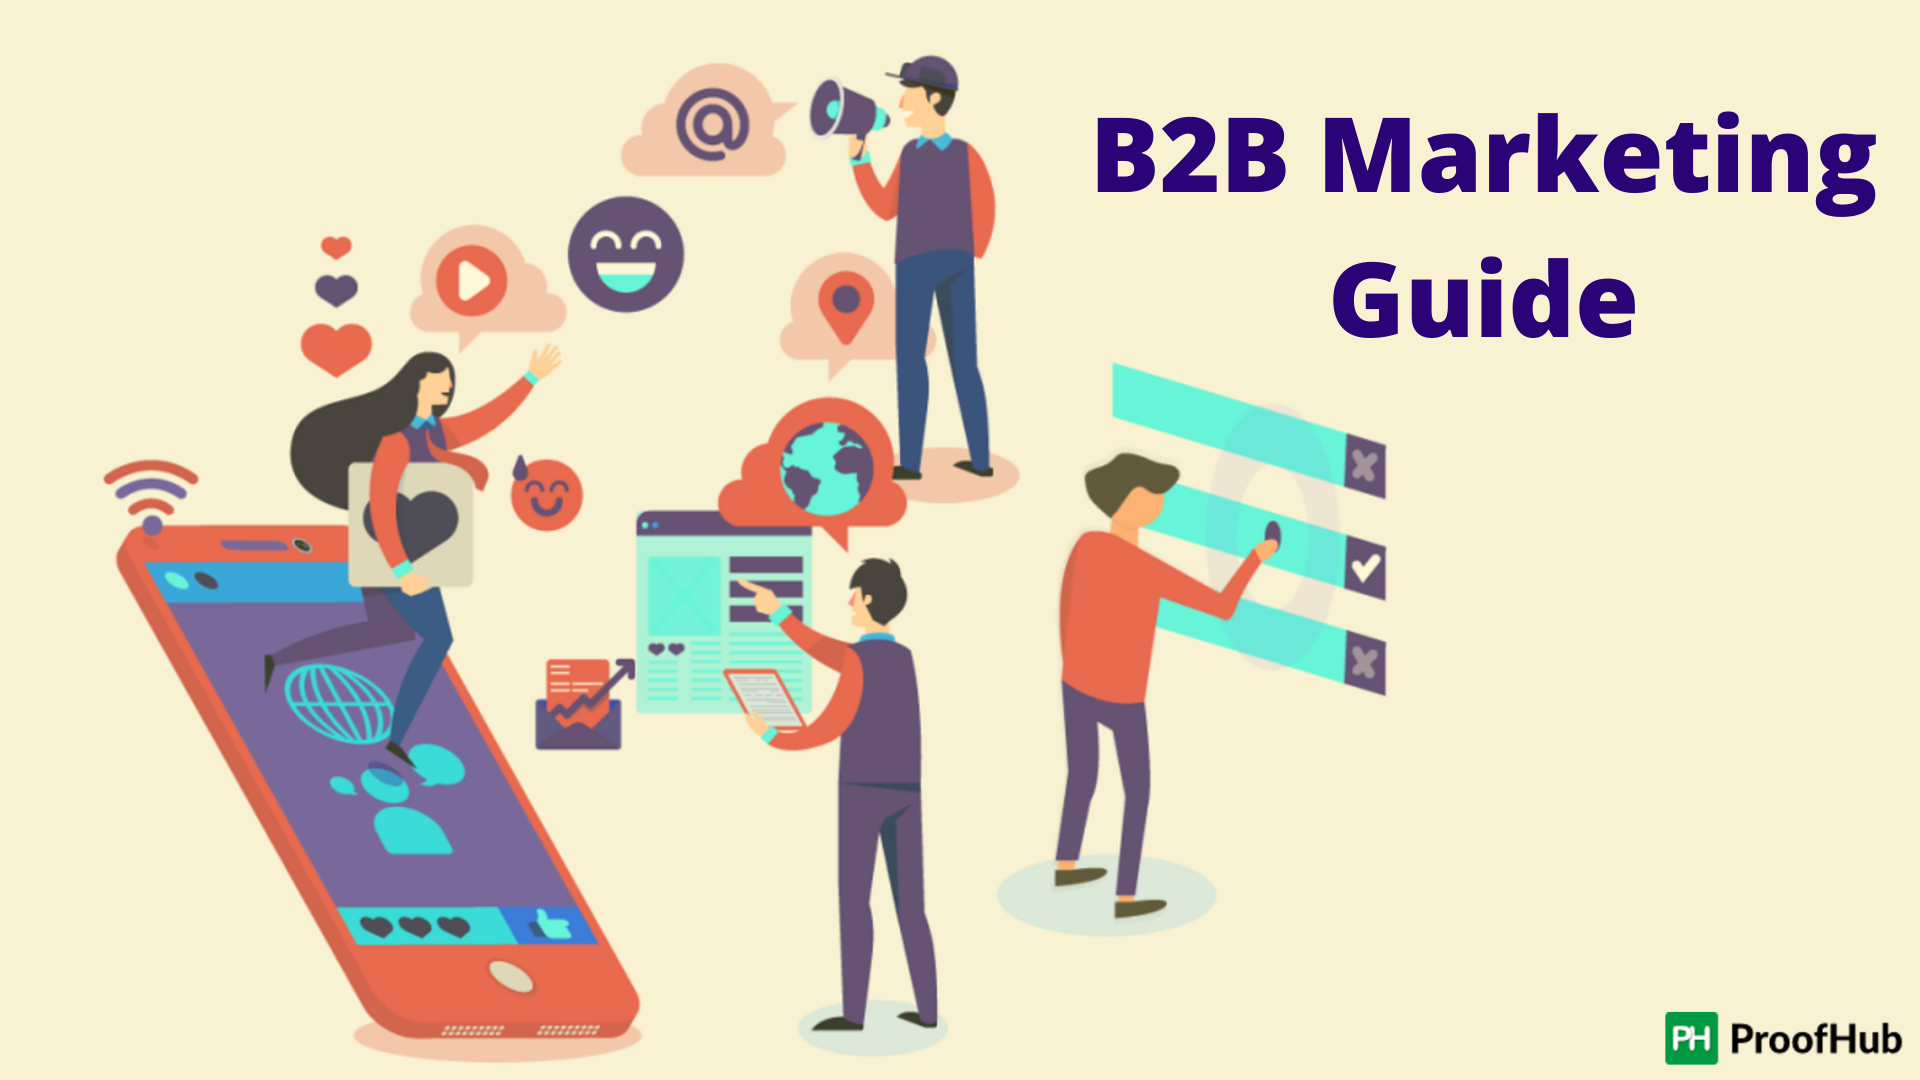 A Complete B2B Marketing Guide No One Told You About Till Now